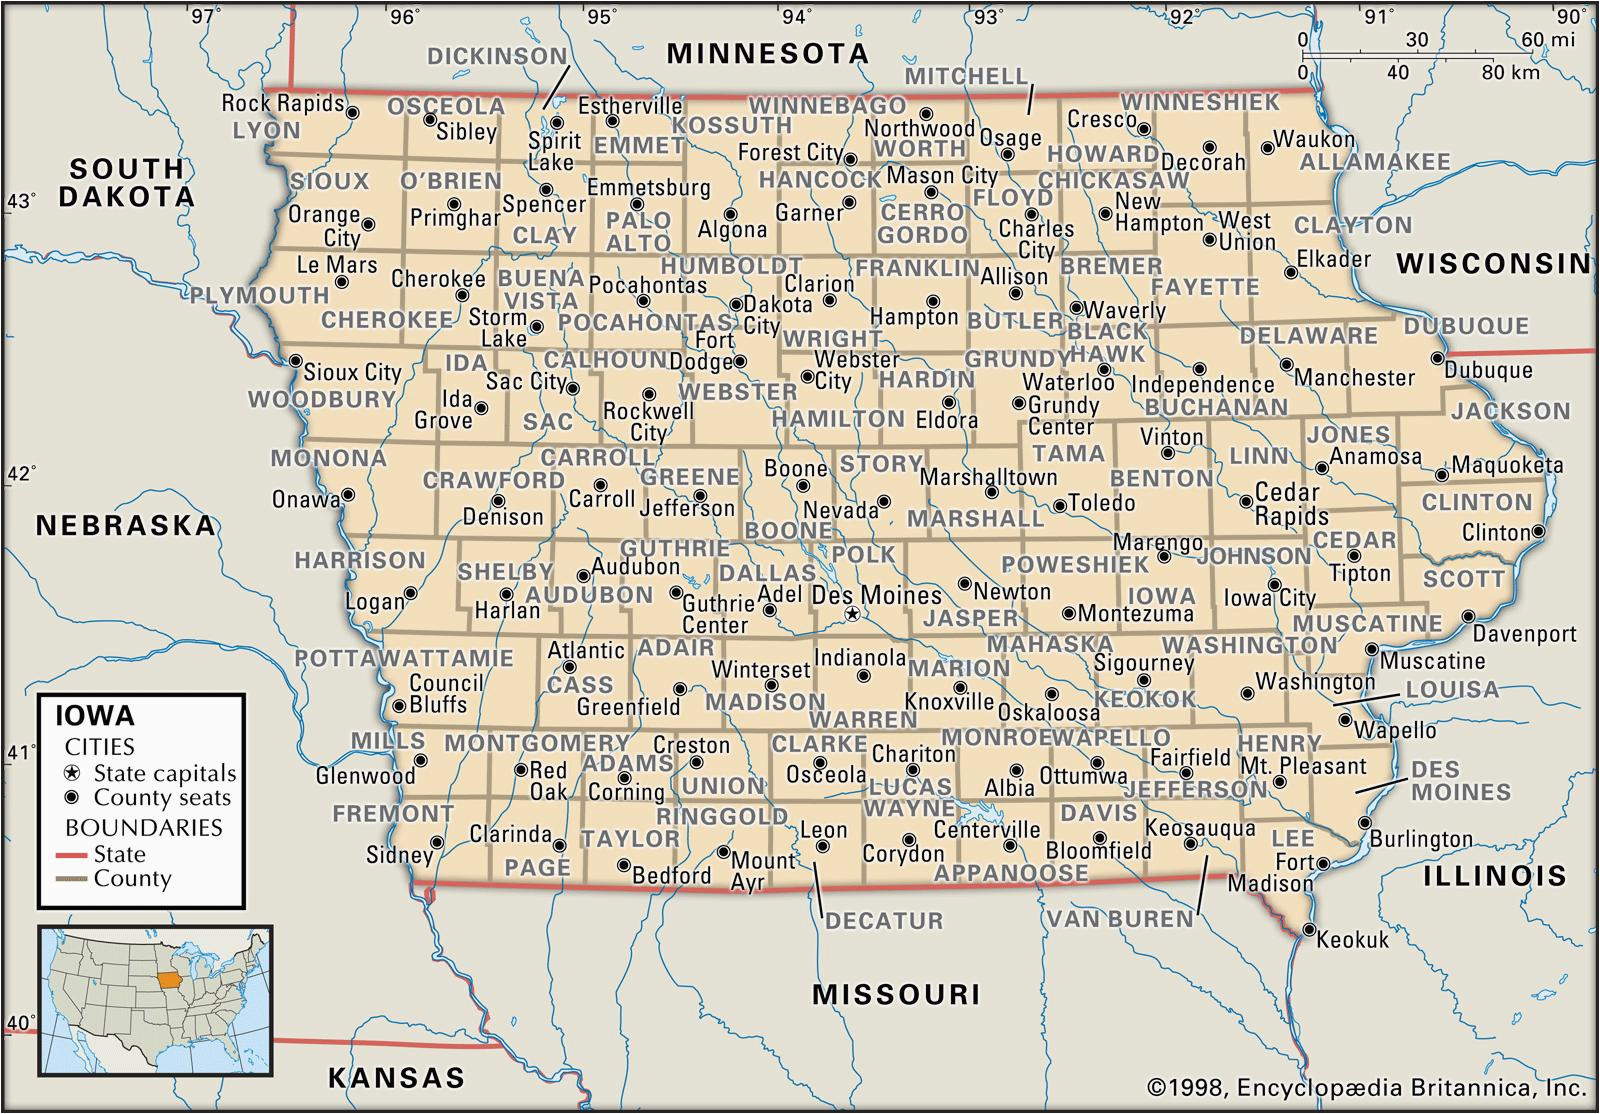 Minnesota Wisconsin Border Map State And County Maps Of Iowa Of Minnesota Wisconsin Border Map 